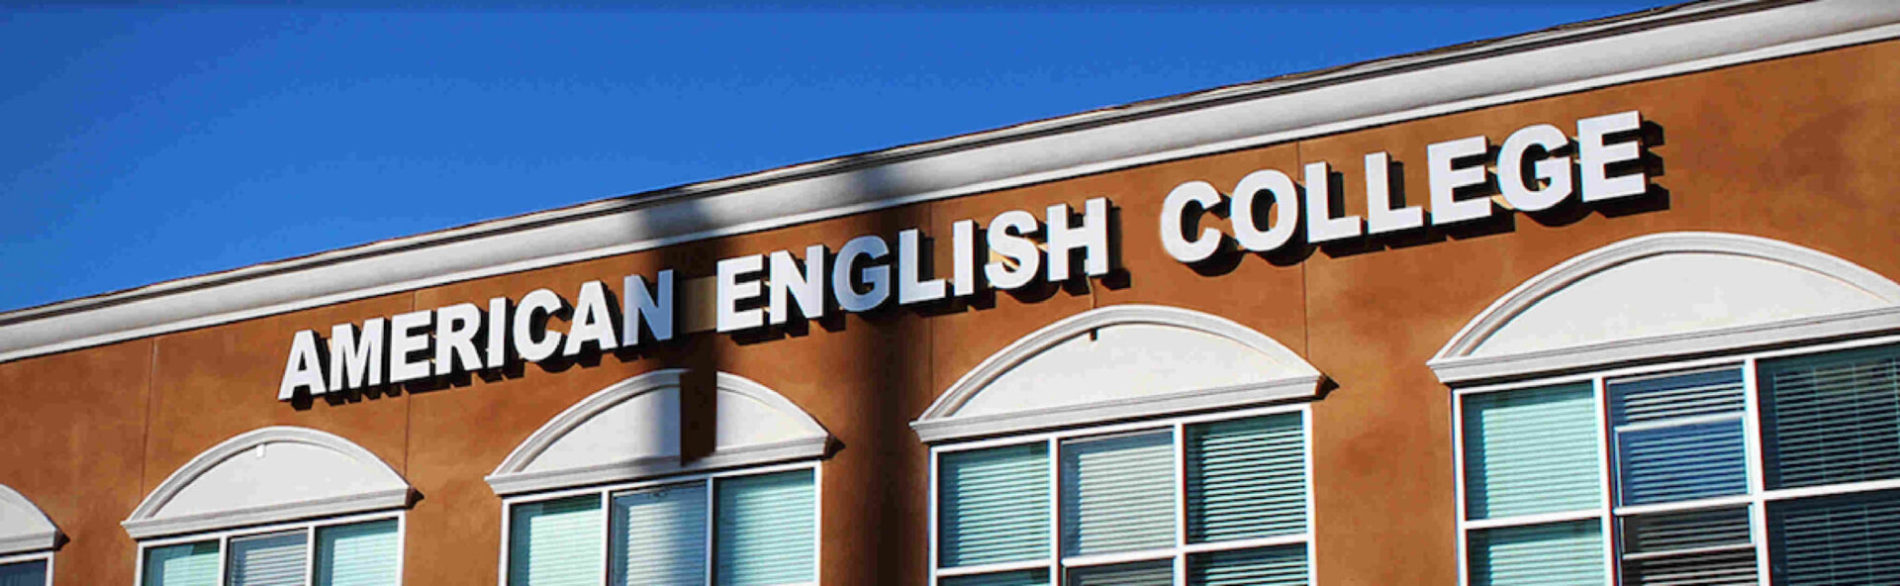 American English College Building